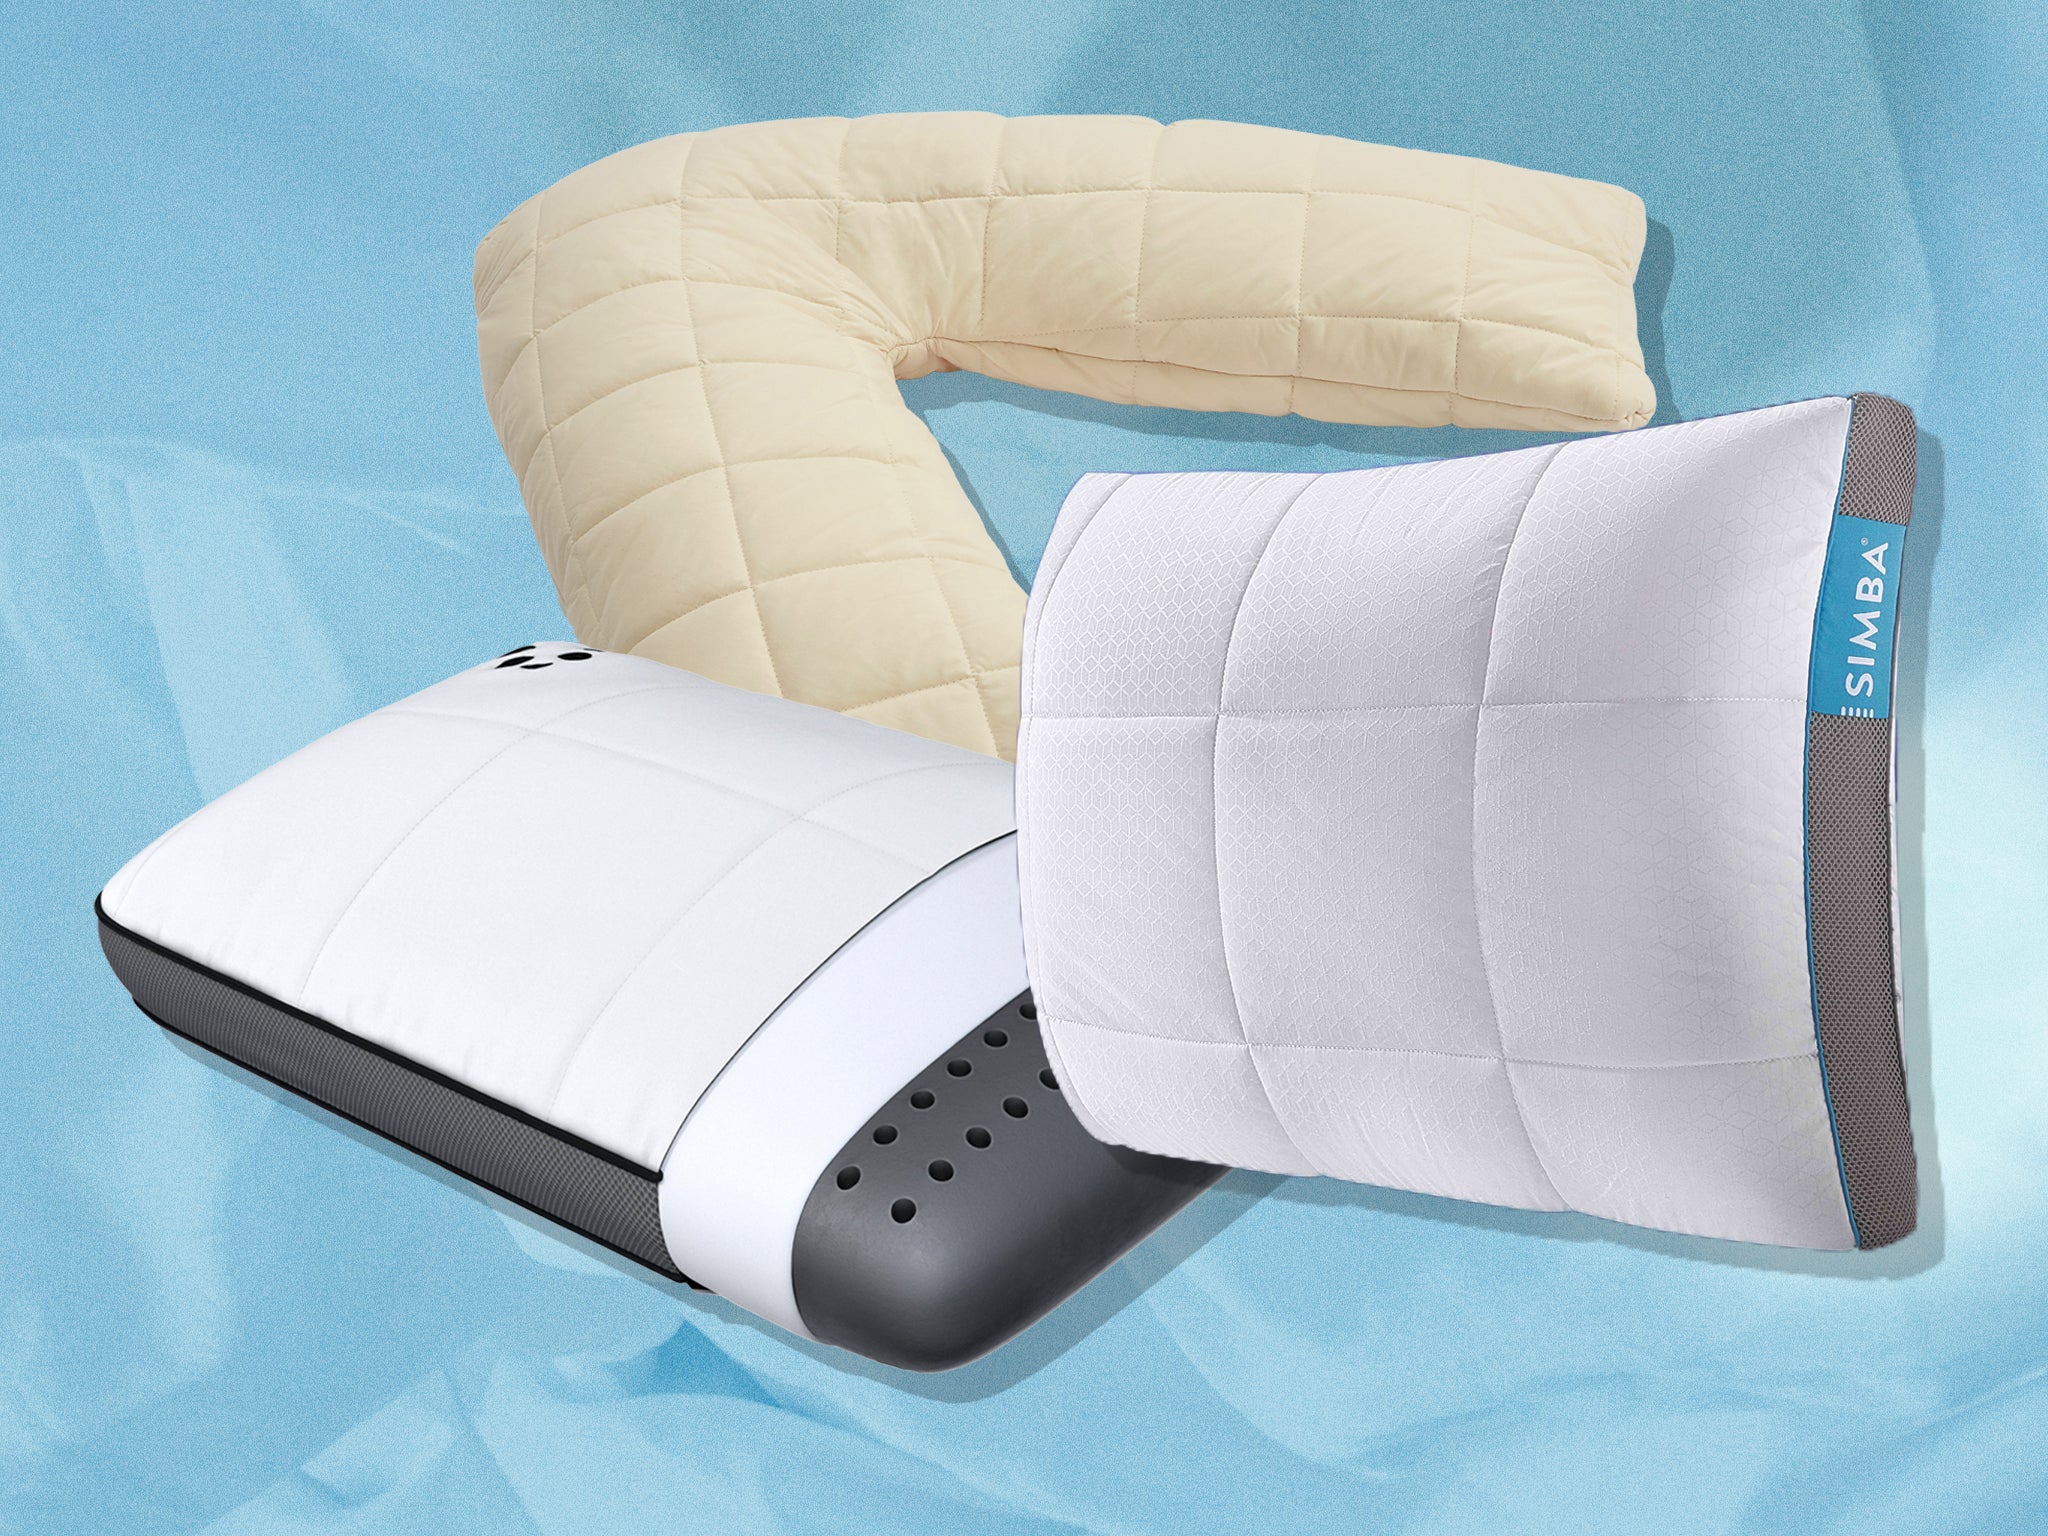 How to Find the Best Pillow for Back and Neck Pain